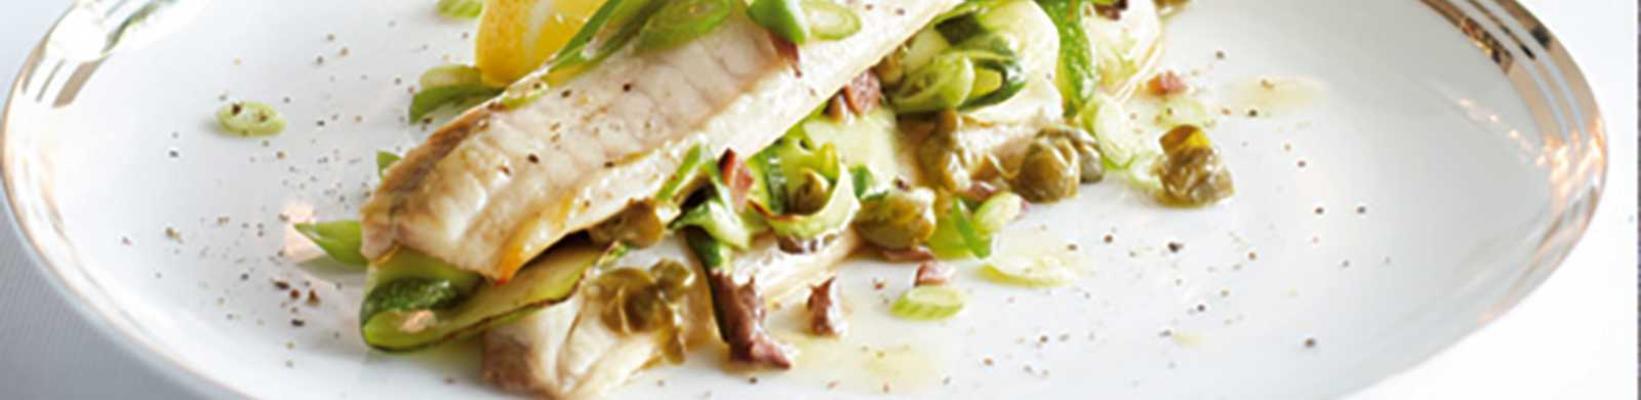 tilapia sandwich with zucchini and anchovy caper gravy